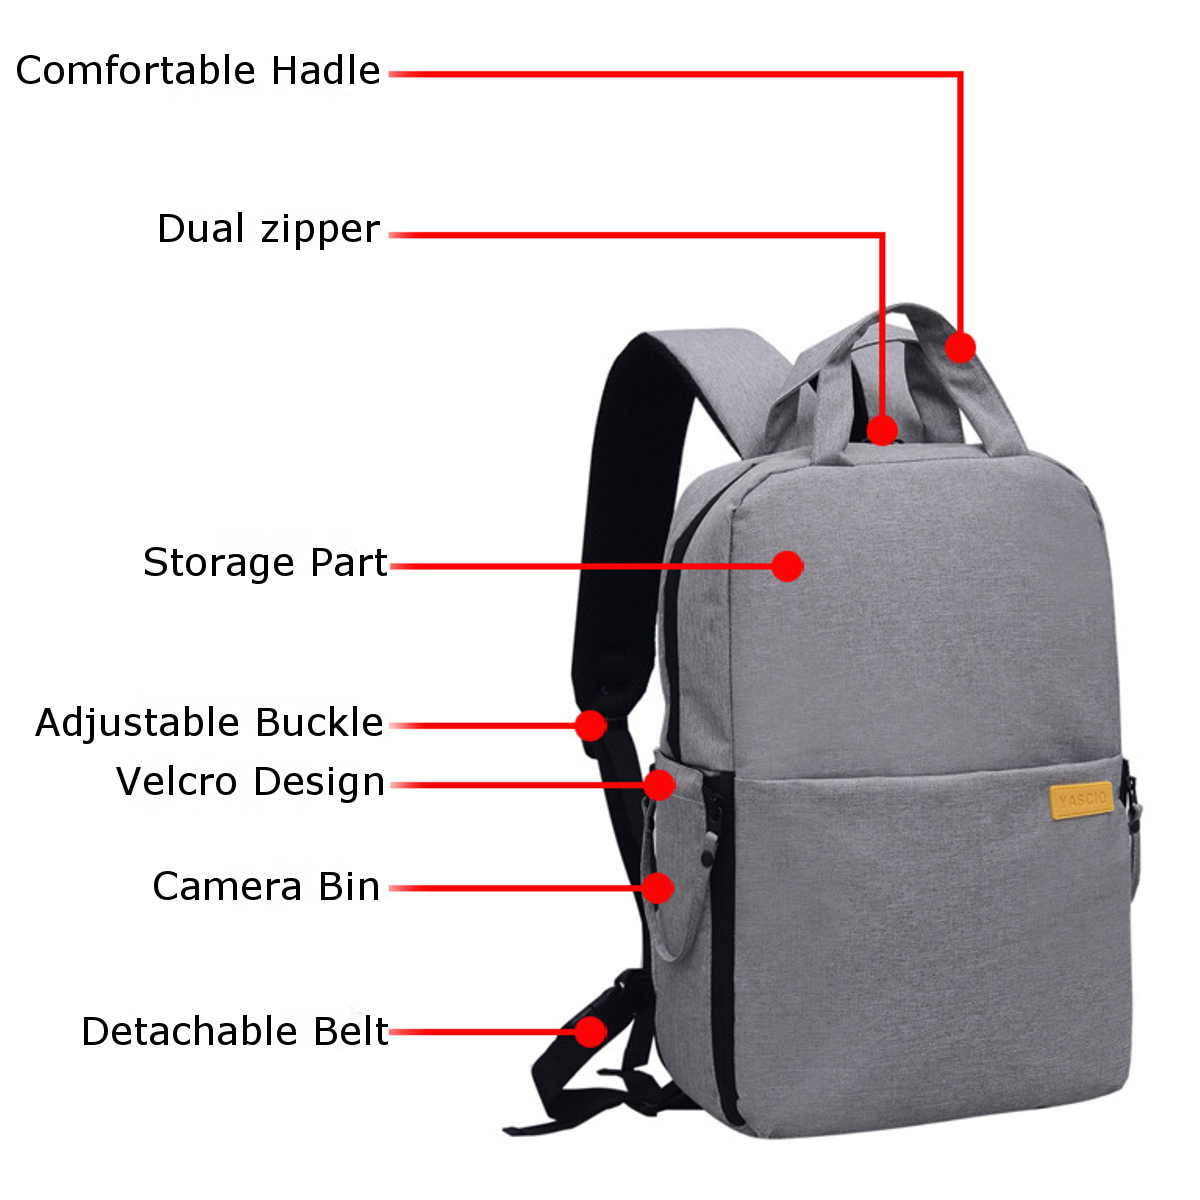 YACIO-Water-Resistant-Backpack-for-DSLR-Camera-Lens-Accessories-with-Insert-Bag-Rain-Cover-1420250-2